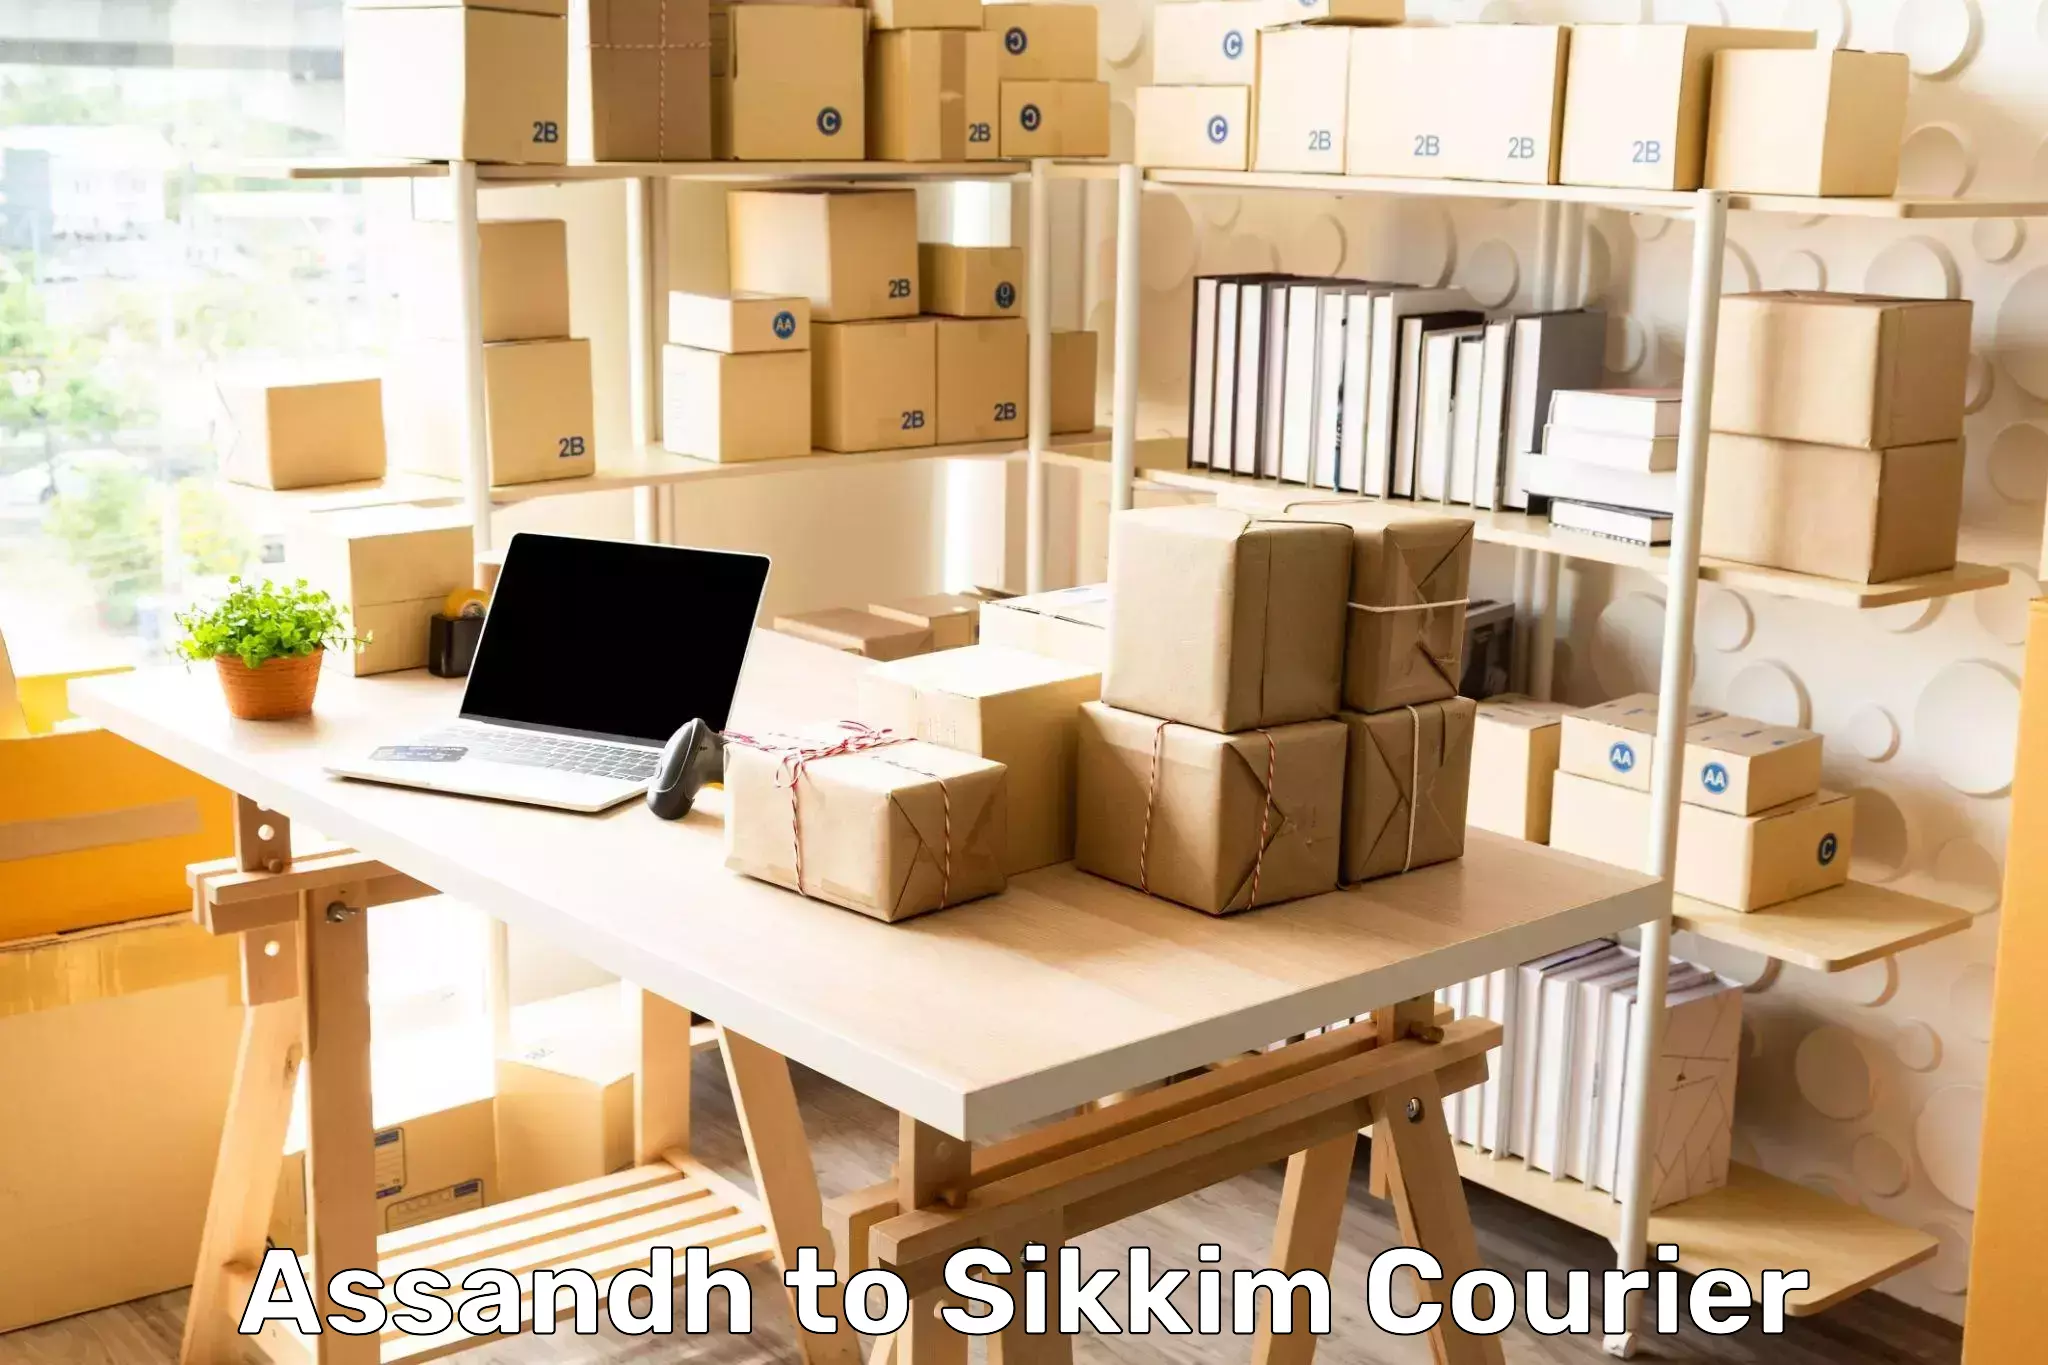 Cost-effective courier options Assandh to Pelling